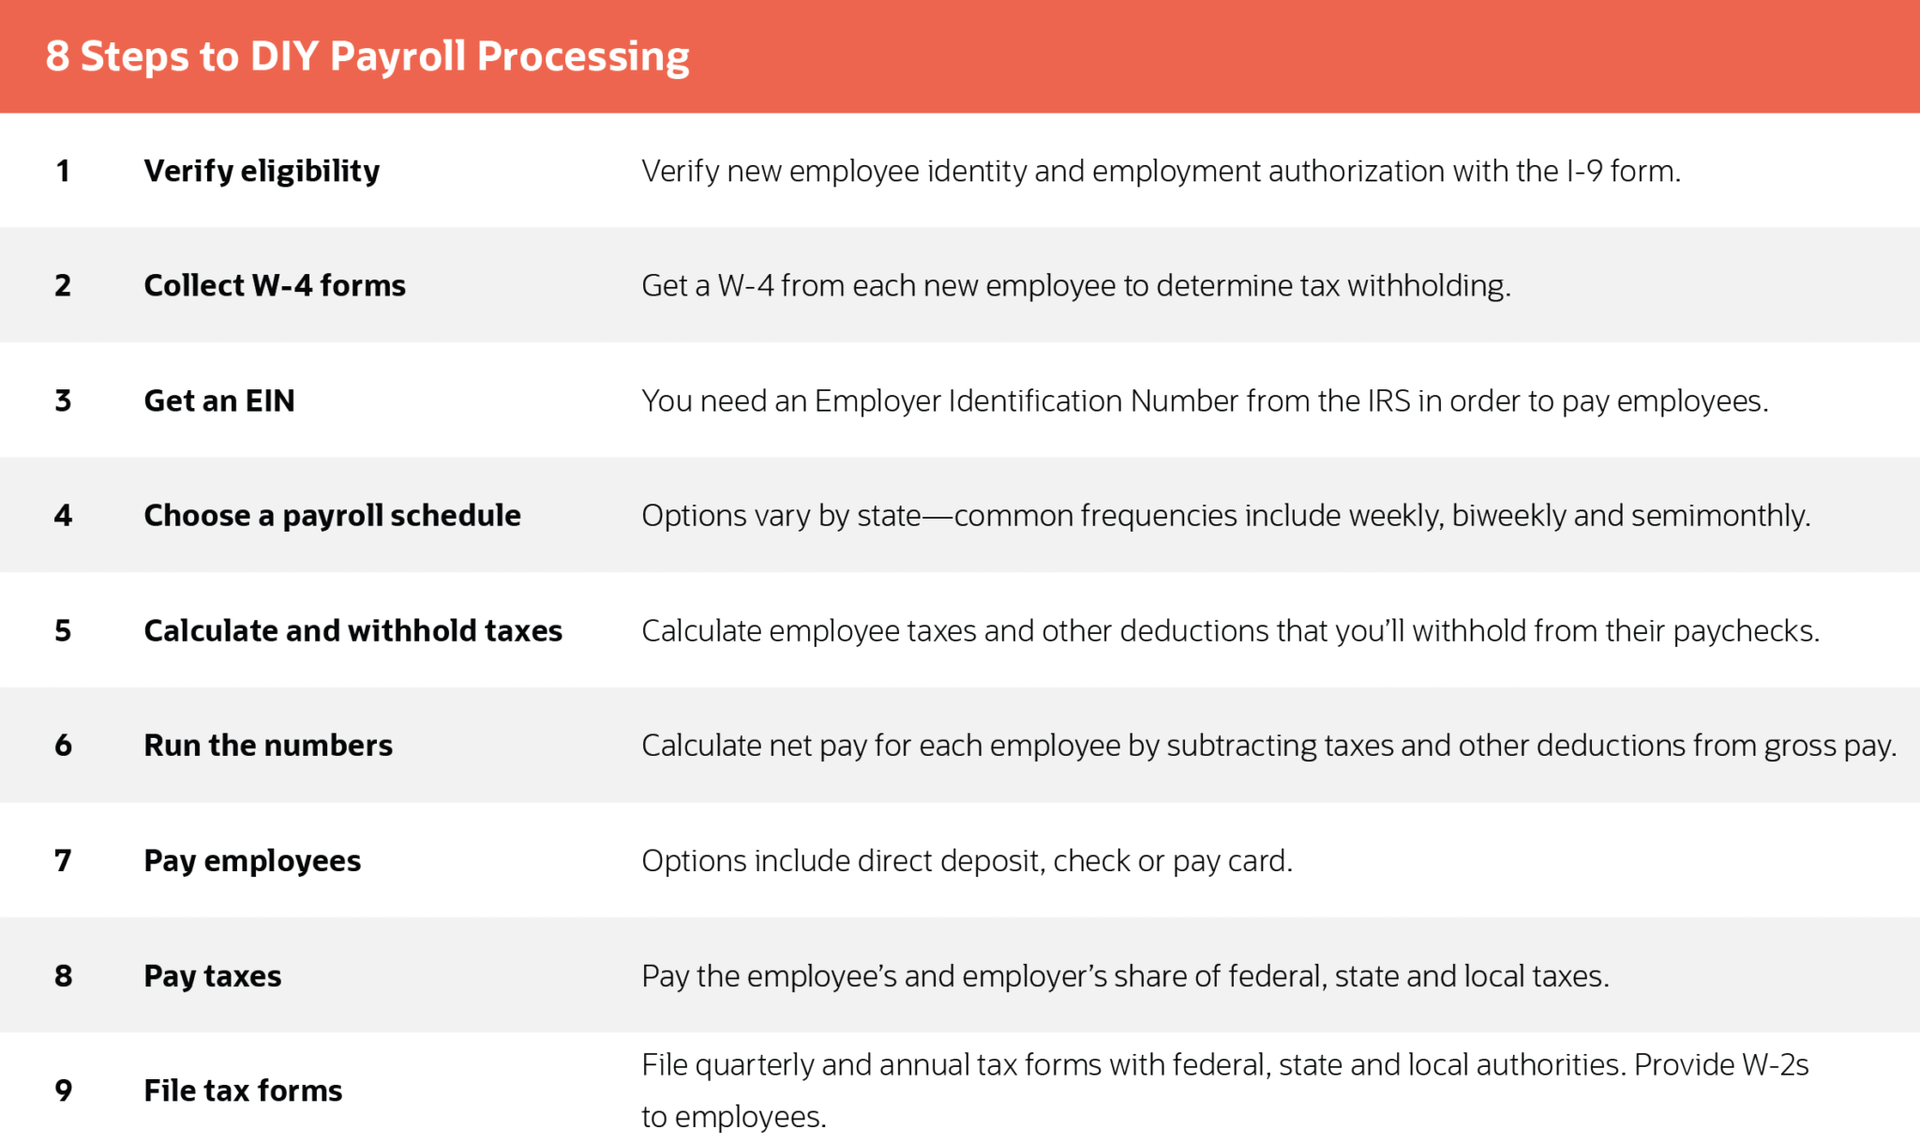 This is a graphic listing 8 steps for DIY payroll processing.